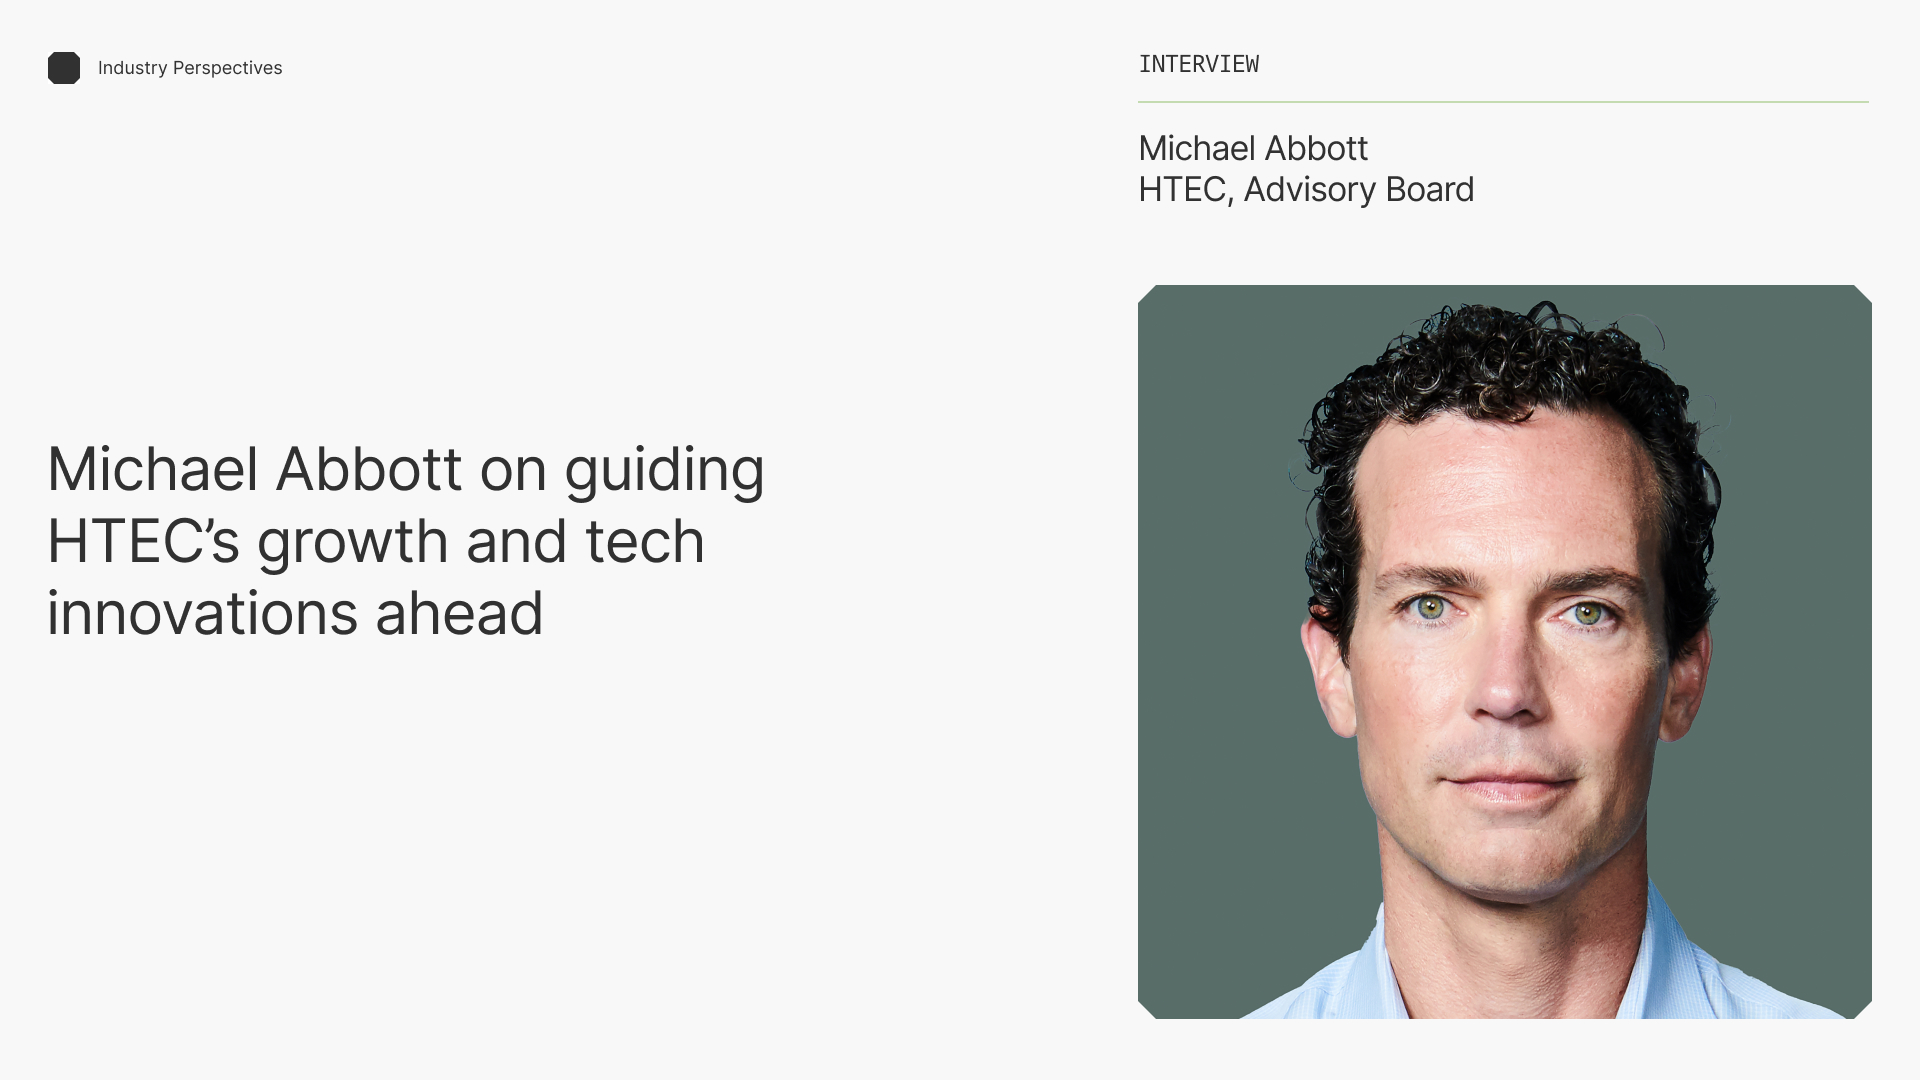 HTEC Advisory Board perspective: Michael Abbott, former Apple executive, on goals for HTEC’s future 